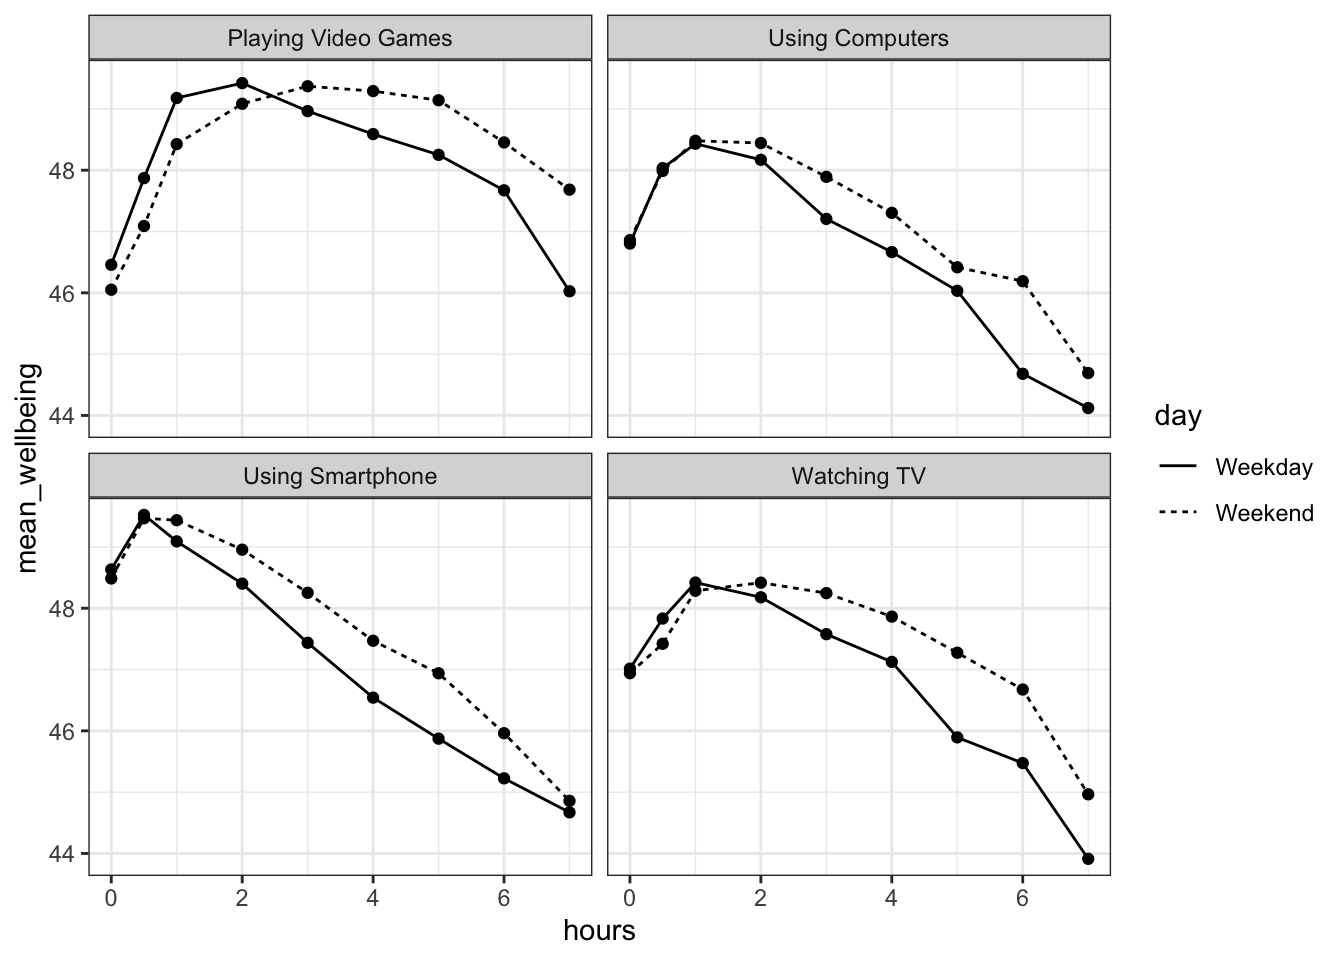 Relationship between wellbeing and screentime usage by technology and weekday